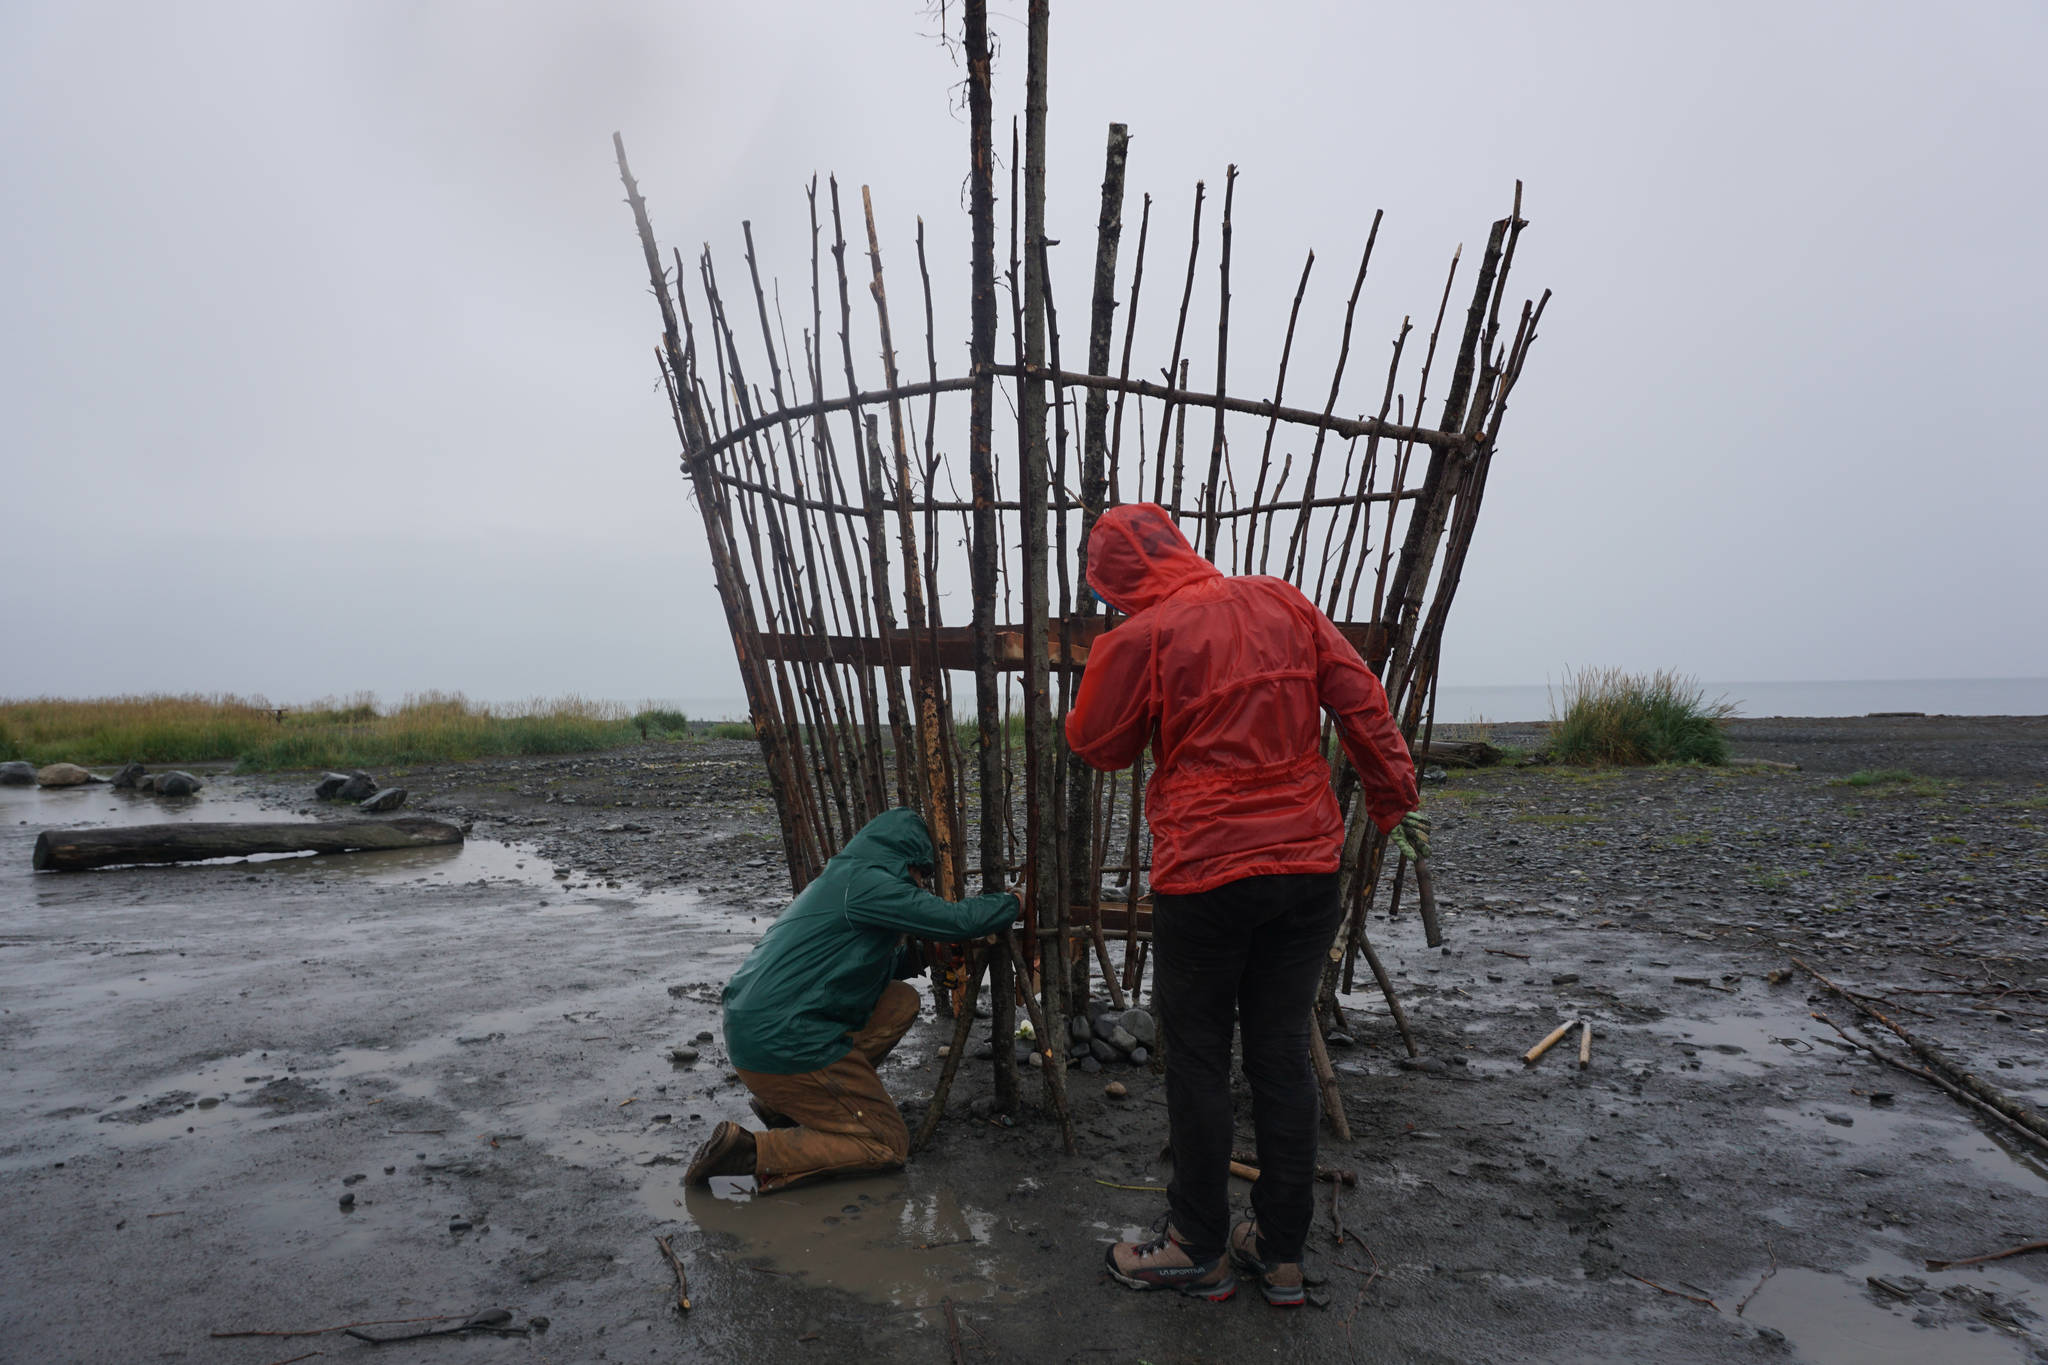 Robin Austin, left, and Natalia Mulawa, right, work on Shine, this year’s Burning Basket, Tuesday, Sept. 5, 2017 at Mariner Park on the Homer Spit, Alaska. The annual interactive art project will be offered to the community on Sunday and then transformed into heat and light at sunset. (Photo by Michael Armstrong, Homer News)